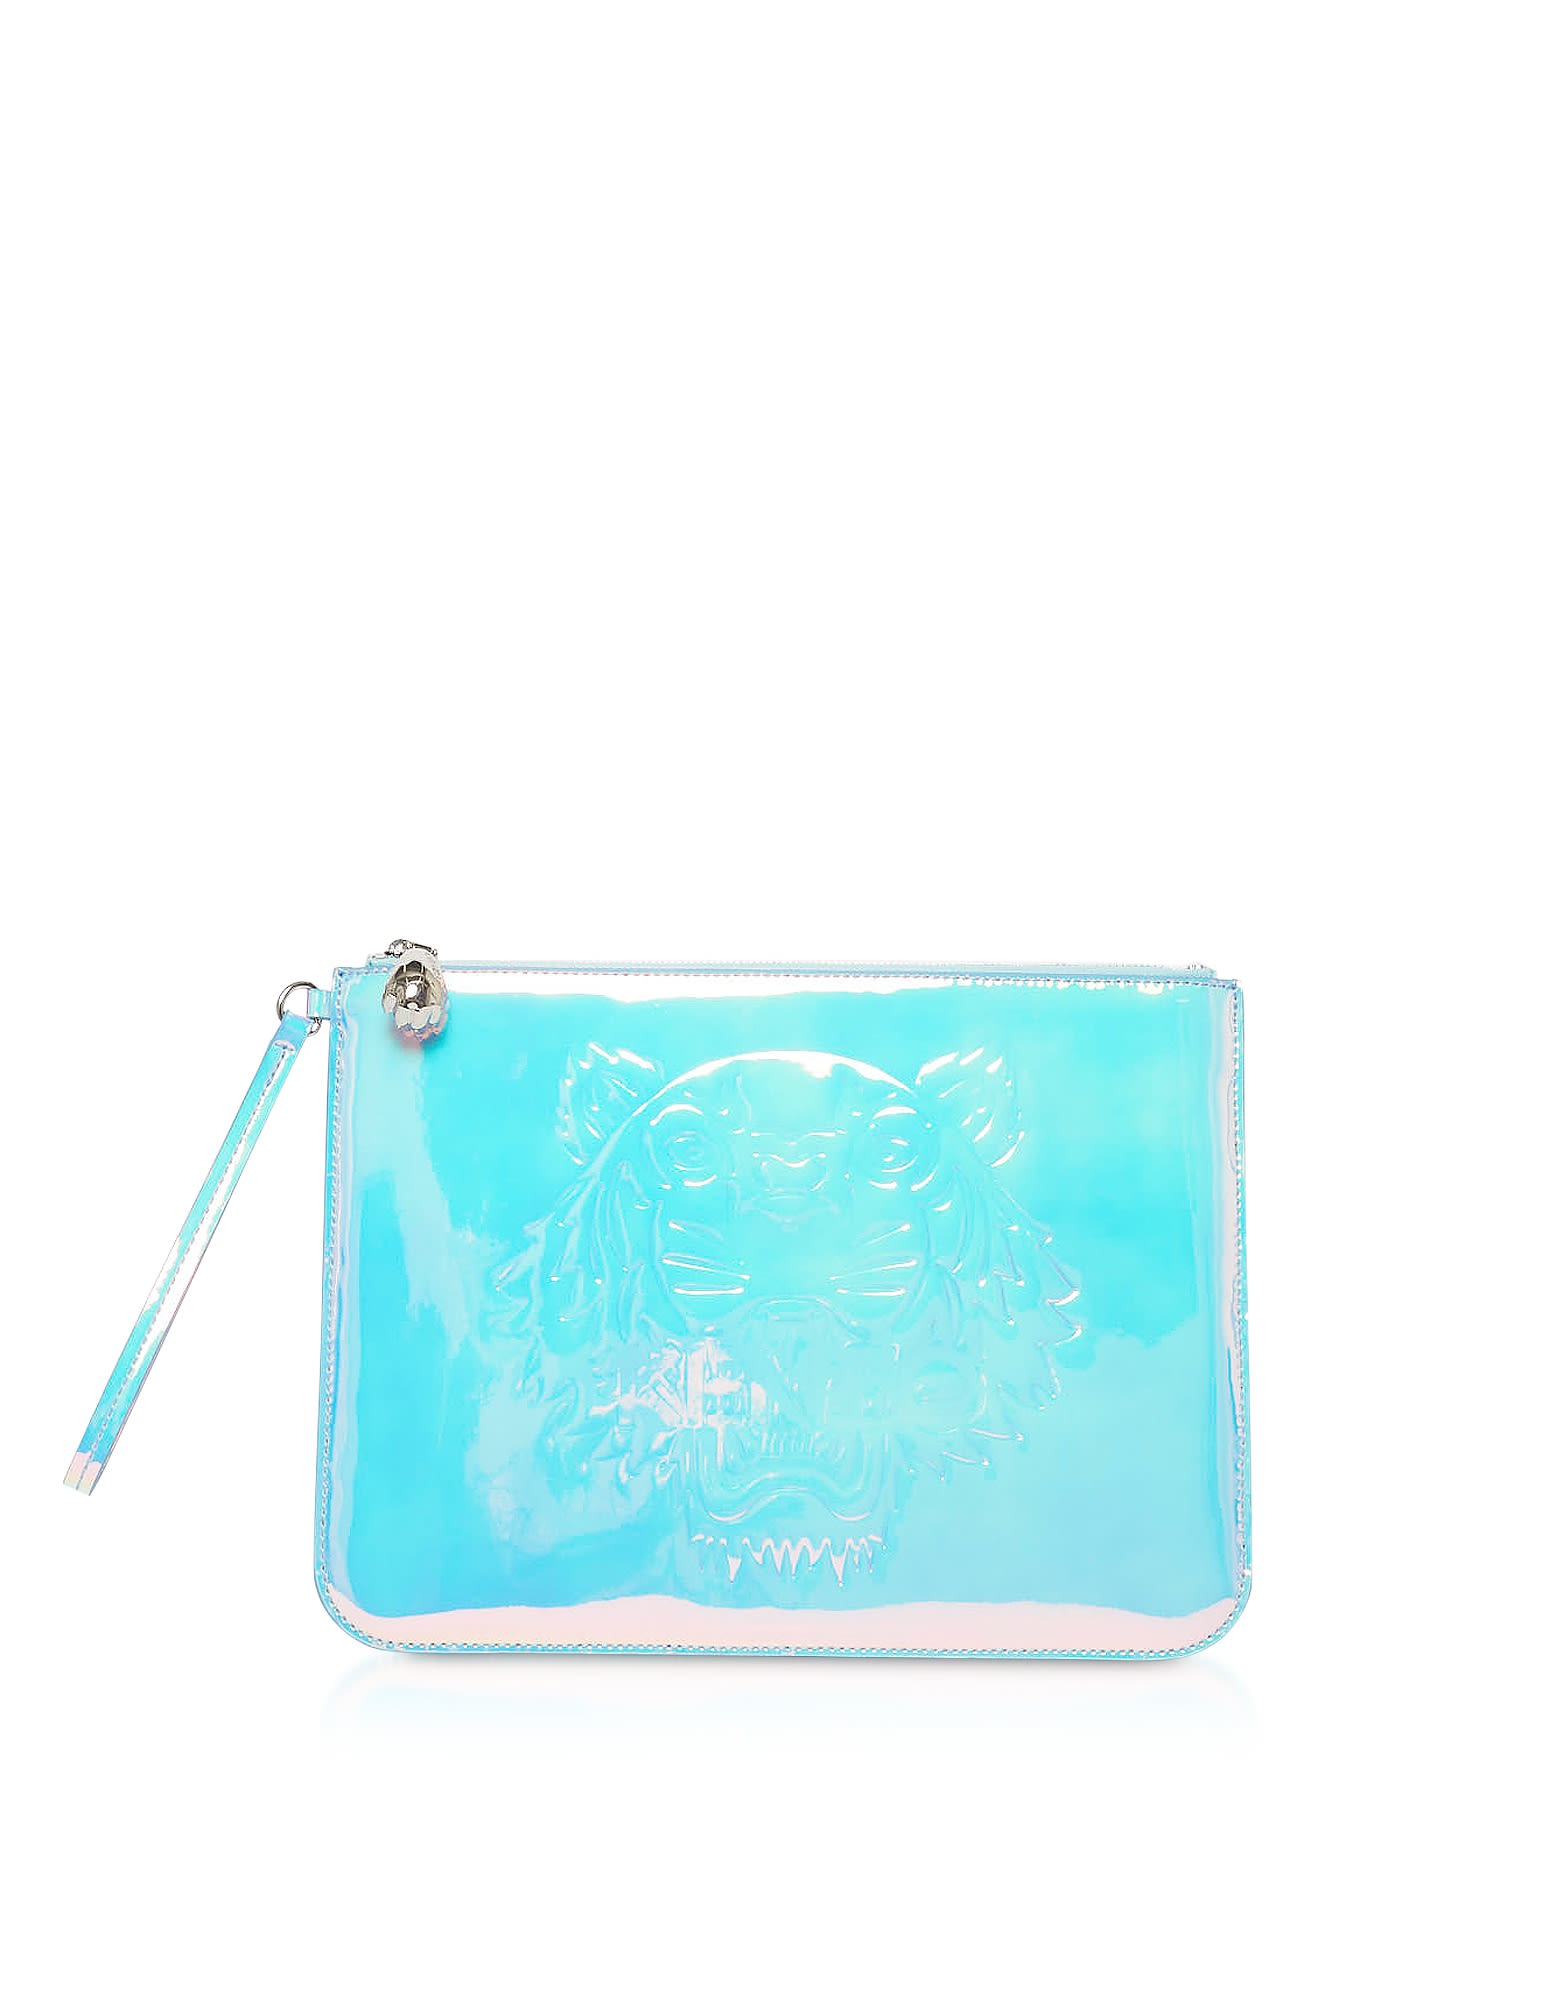 KENZO WHITE PREPPY TIGER EMBOSSED ECO-LEATHER CLUTCH,11255435